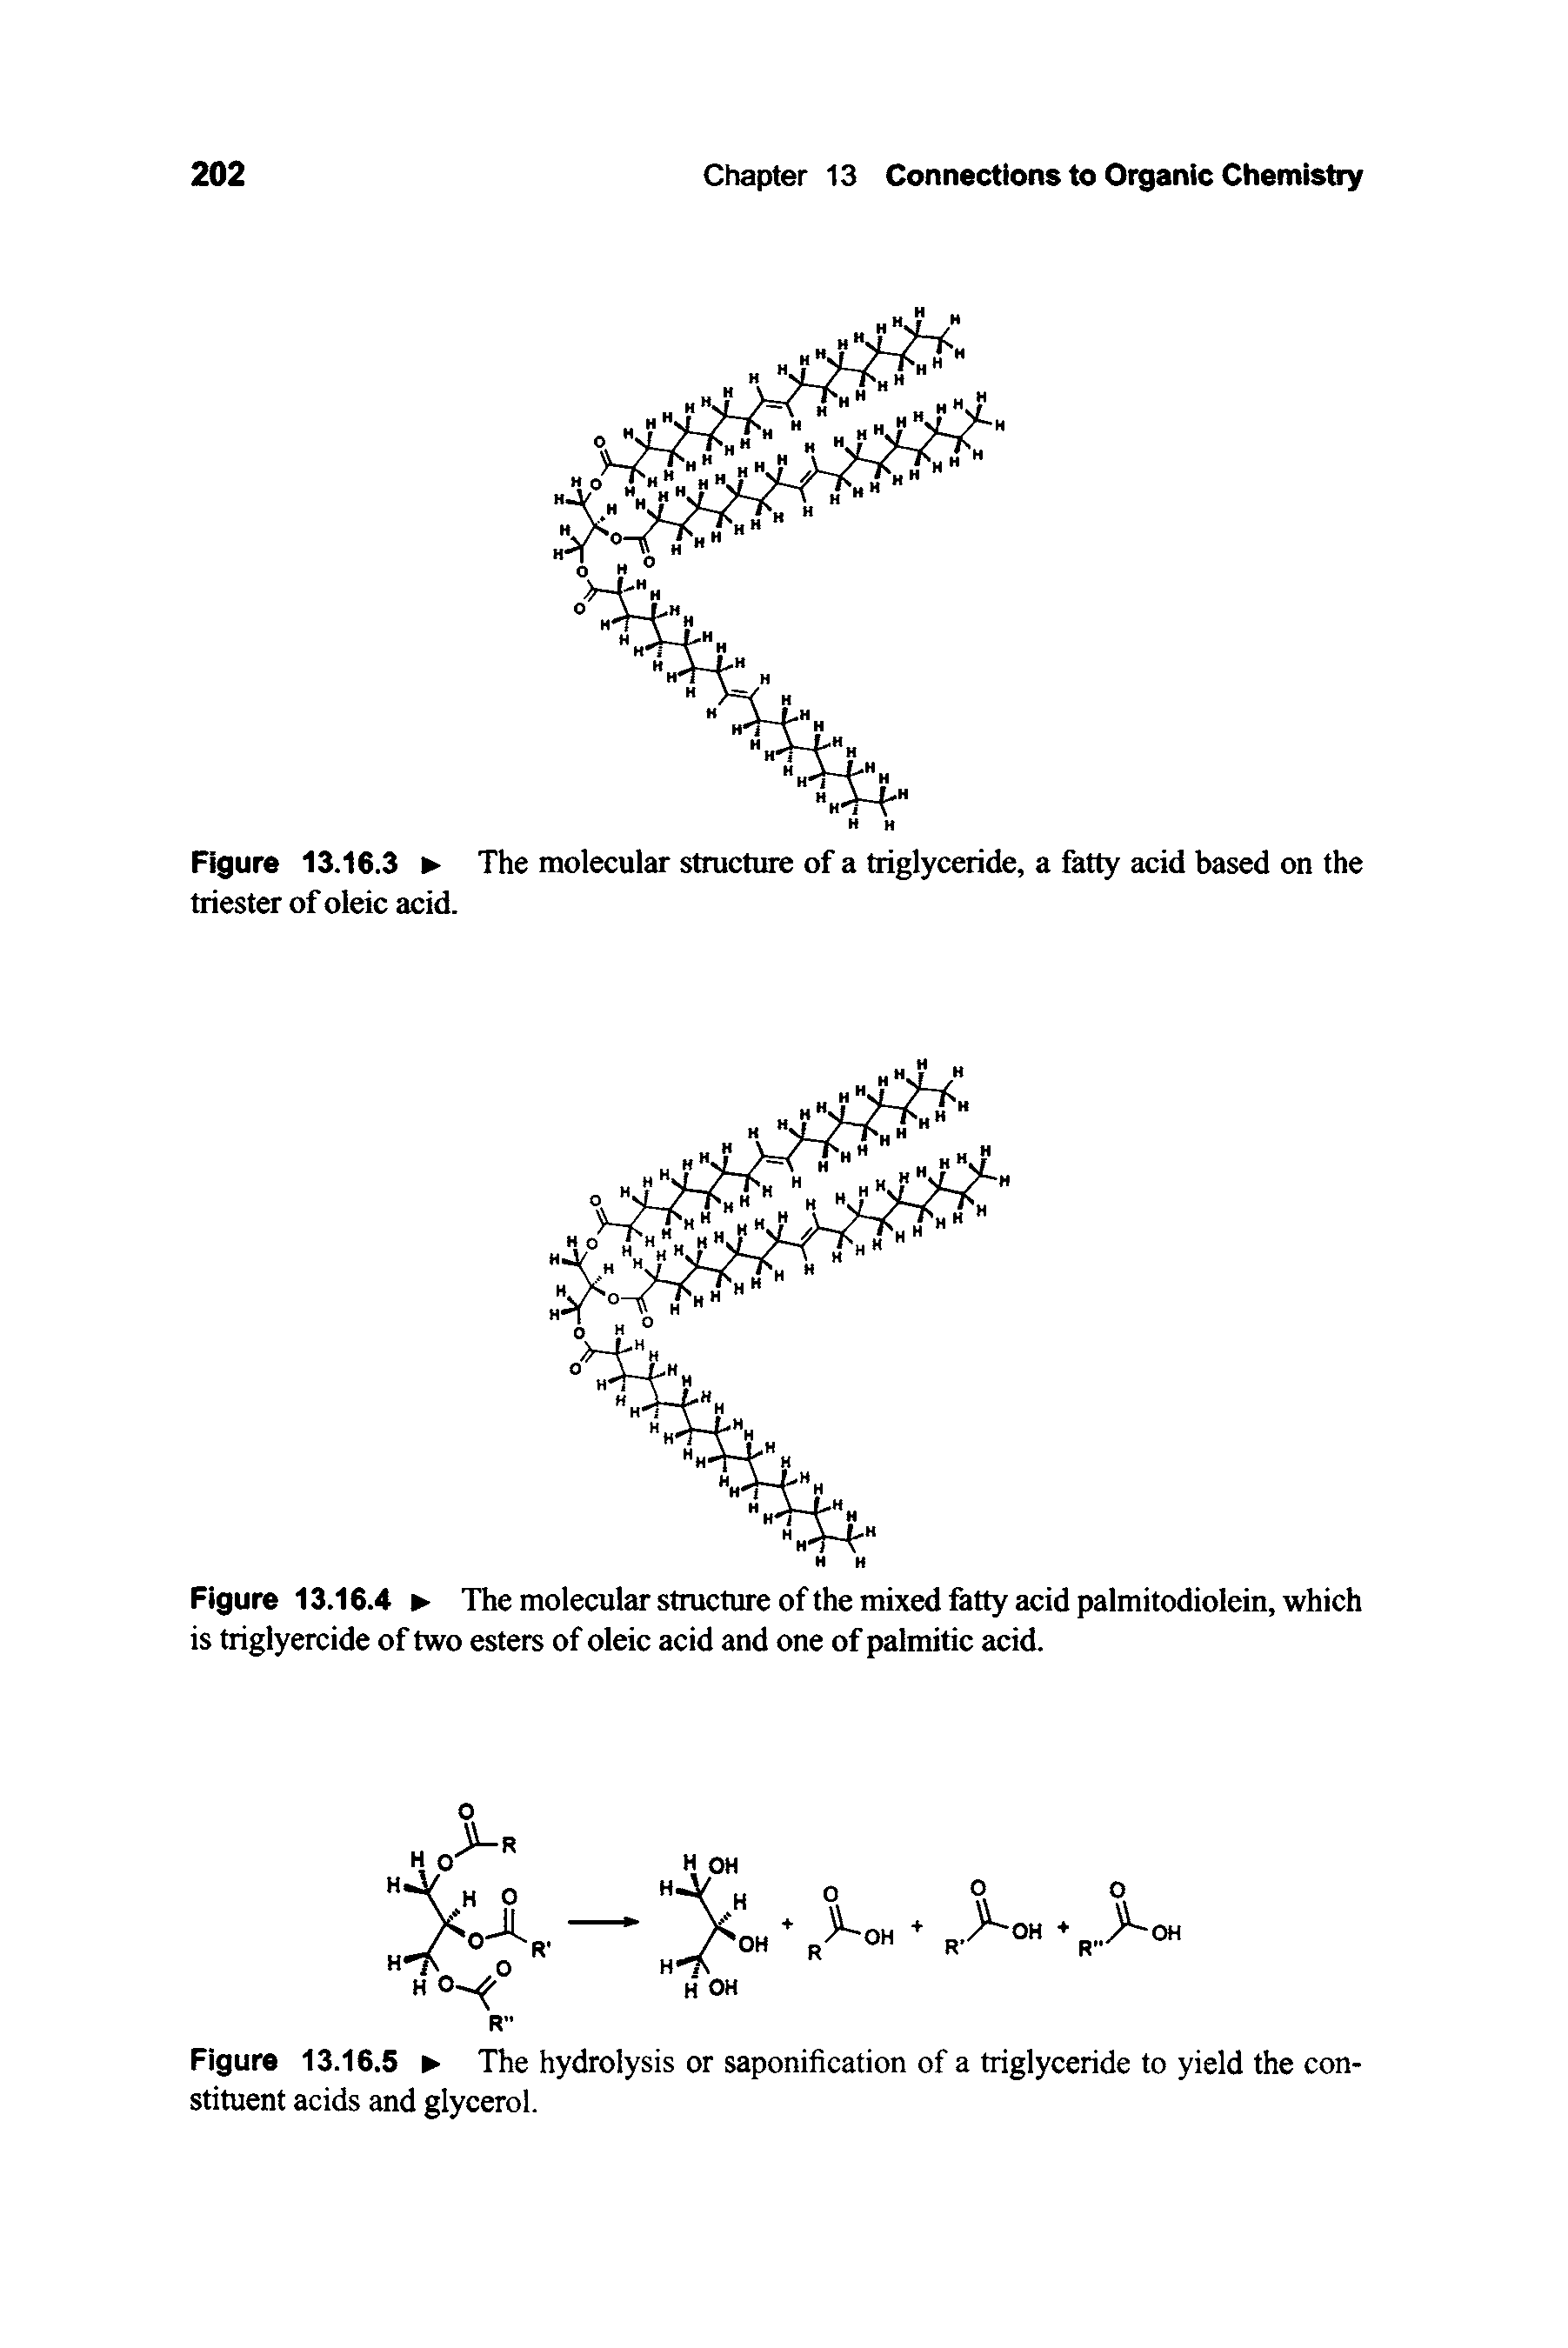 Figure 13.16.5 The hydrolysis or saponification of a triglyceride to yield the constituent acids and glycerol.